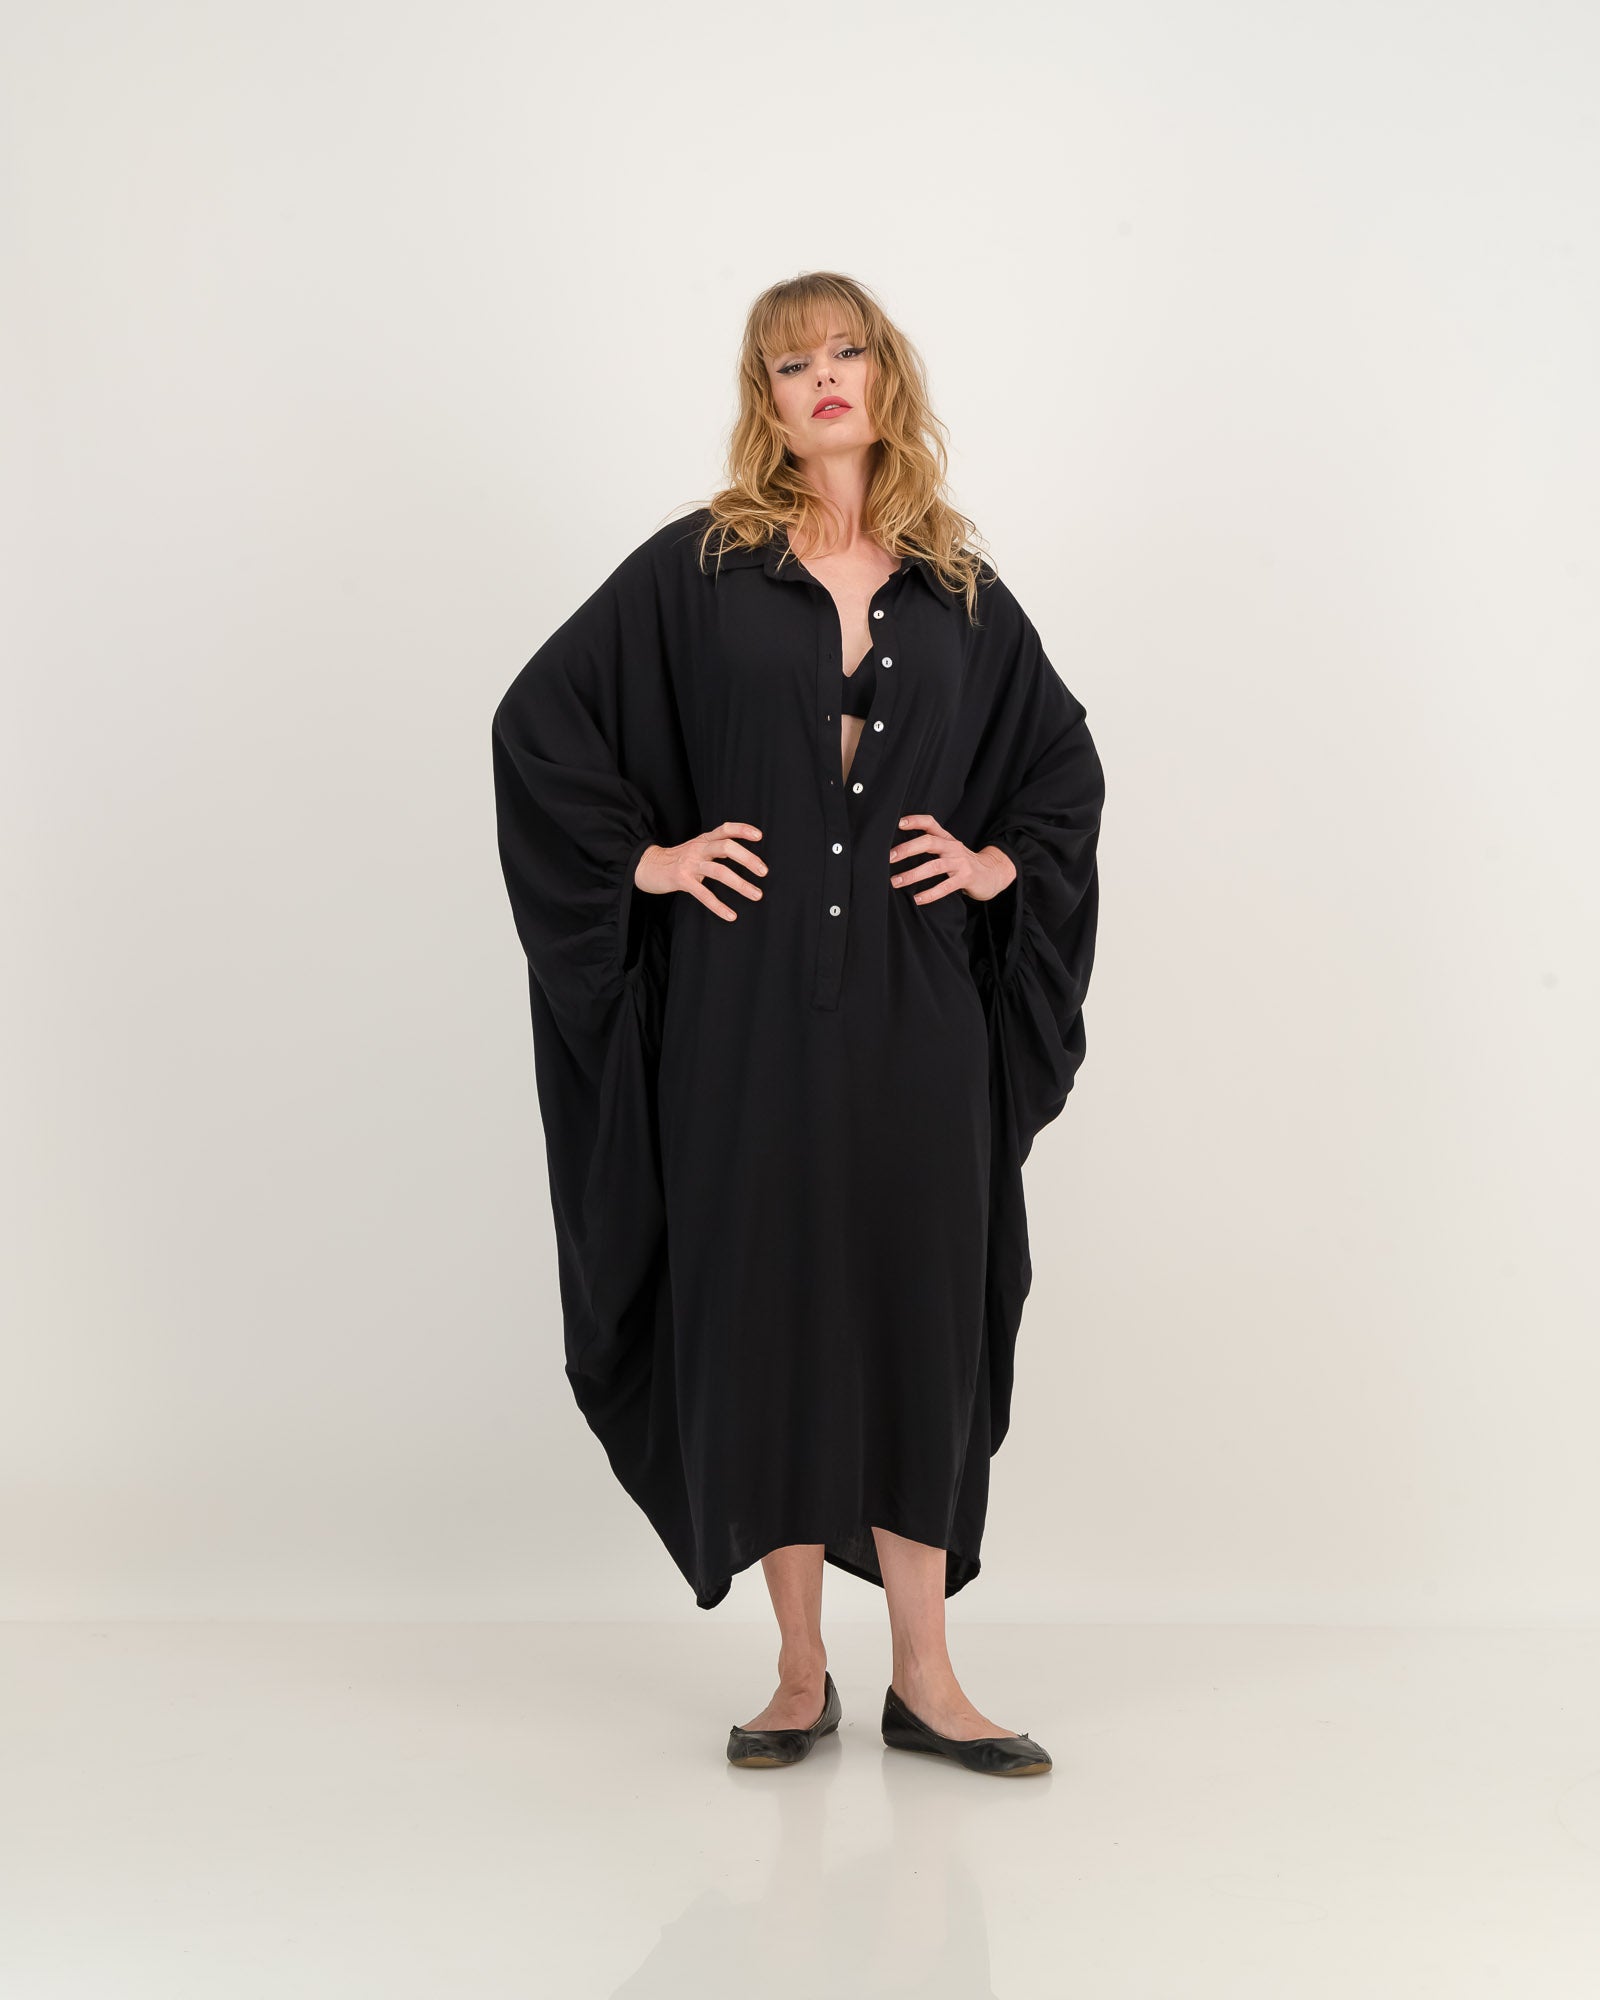 A black kaftan with dramatic batwing sleeve, featuring a relaxed fit, elegant details, and soft draping. Versatile for everyday or belted for a defined shape. Made from eco-friendly rayon.